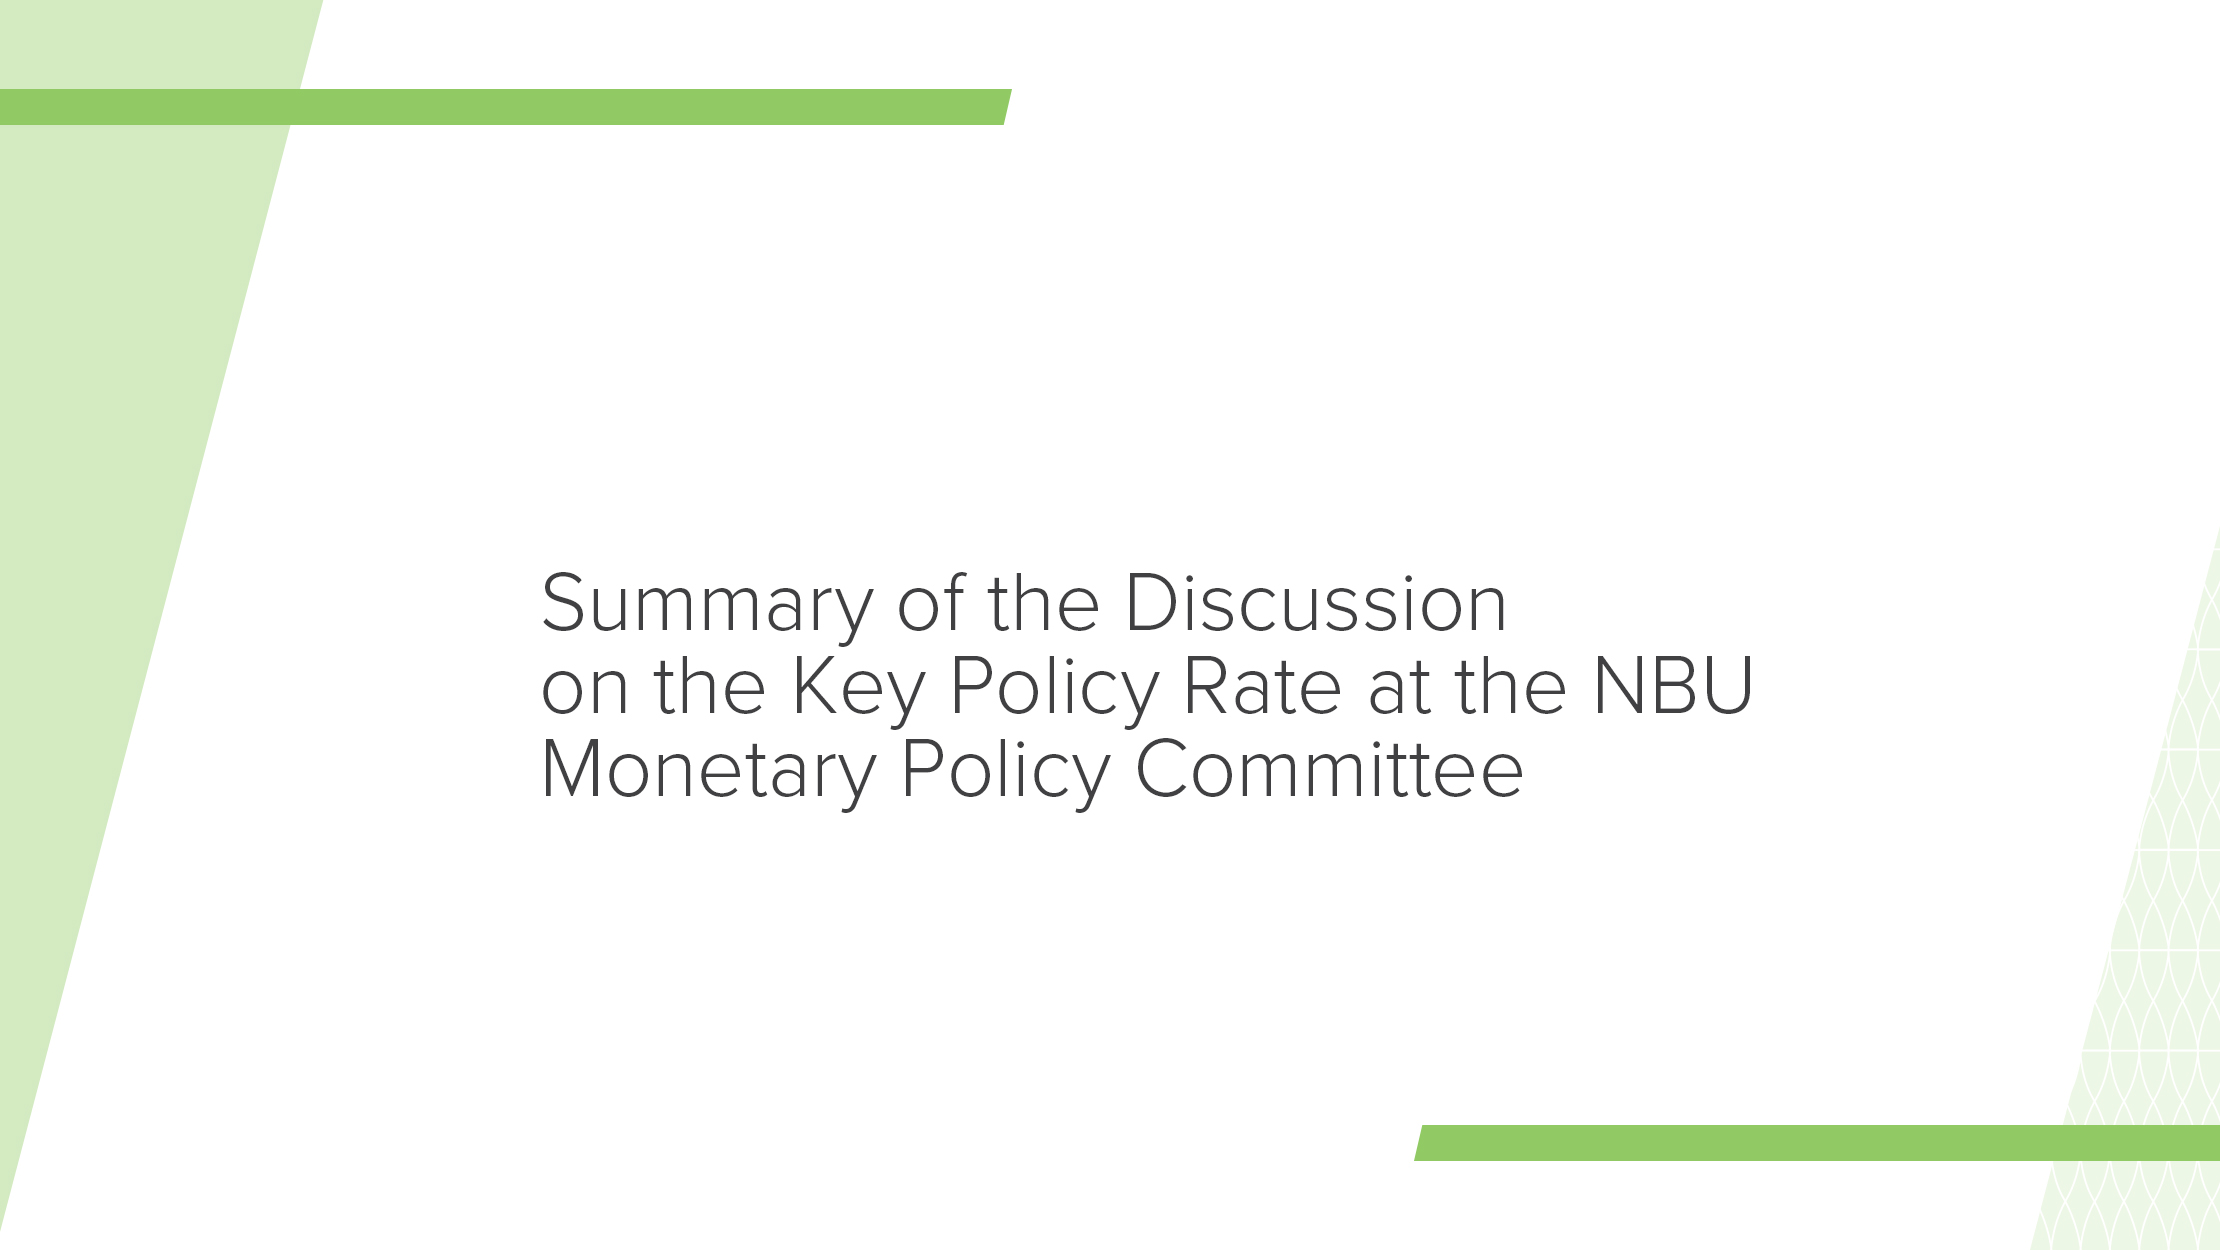 Summary of Key Policy Rate Discussion by NBU Monetary Policy Committee on 26 April 2023